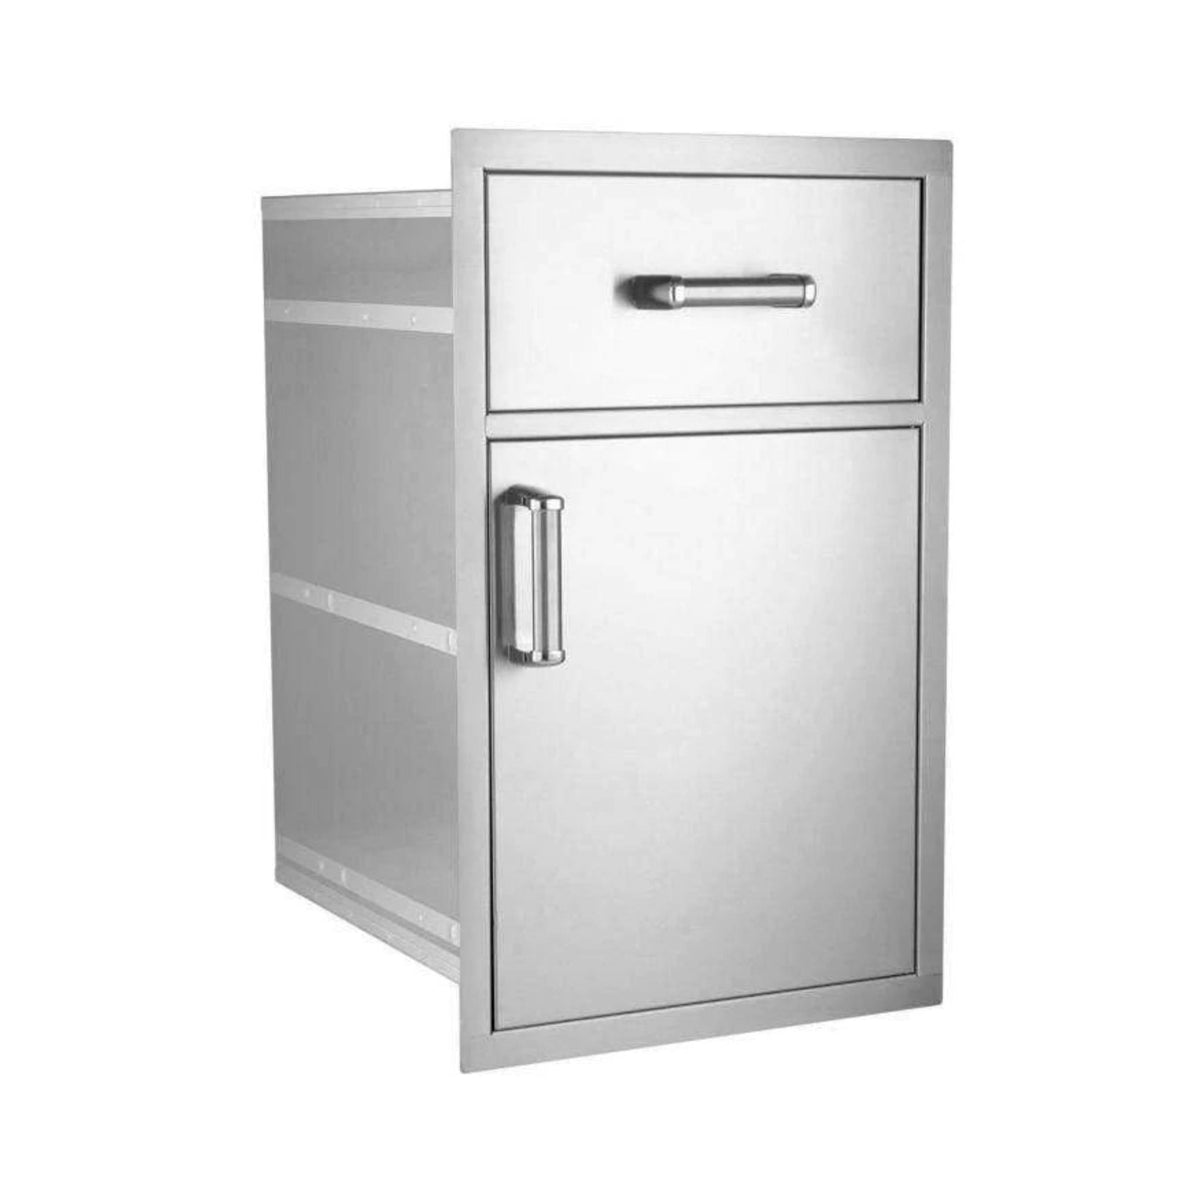 Fire Magic Large Pantry Door and Drawer Combo 54020S